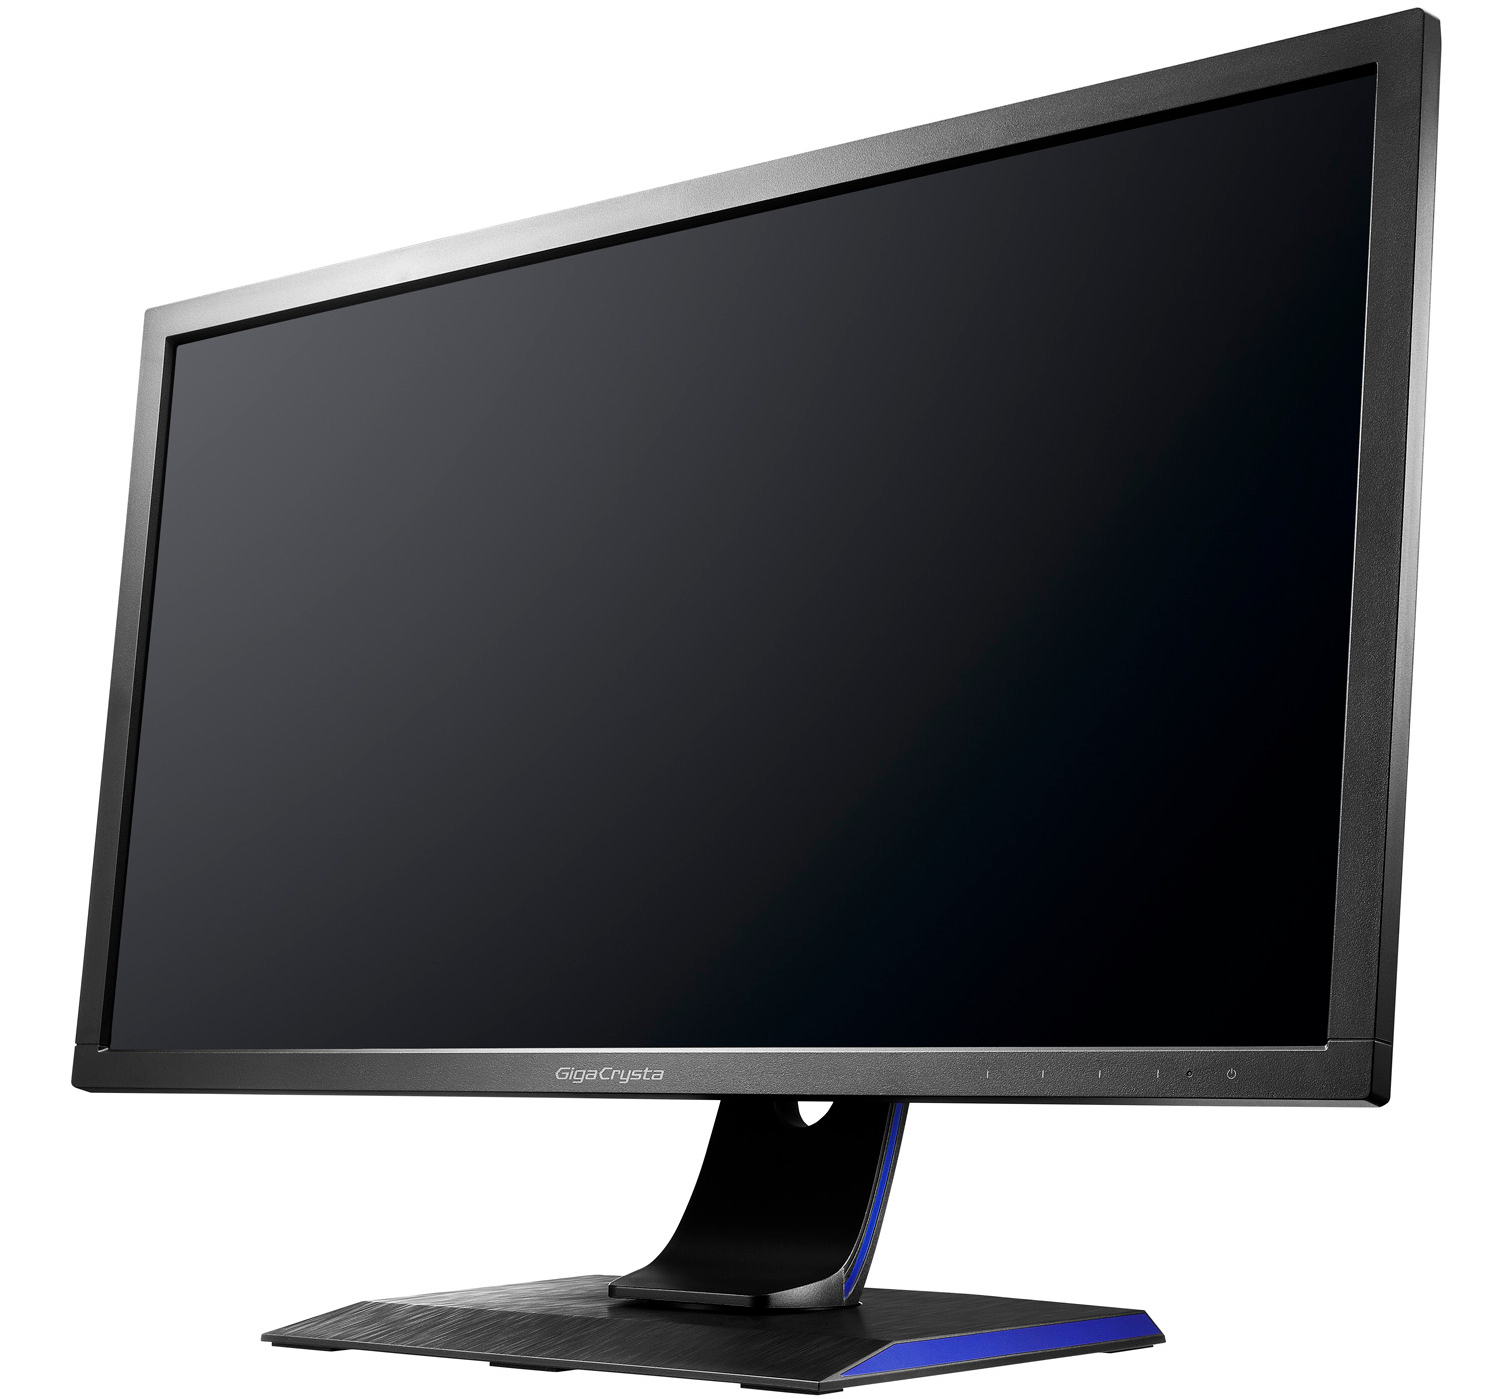 IO Data Launches GigaCrysta 24-inch 1080p Monitors at 240 Hz with